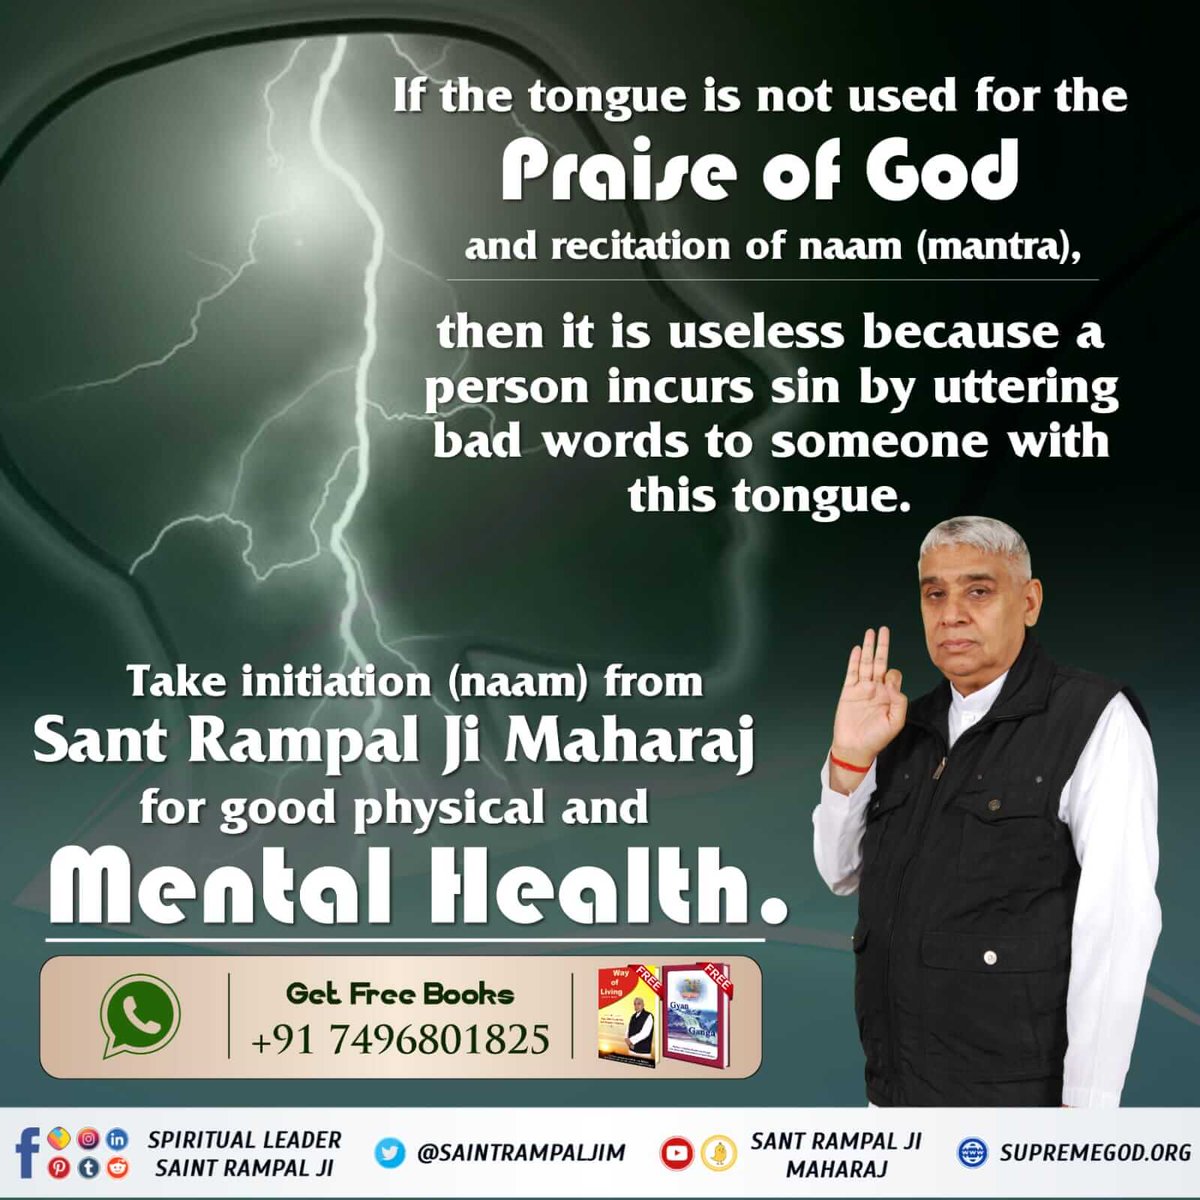 #GodMorningWednesday
Sant Rampal Ji Maharaj is the only true Guru in this world who guarantees peace, happiness and salvation.
#wednesdaythought
#WednesdayMotivation